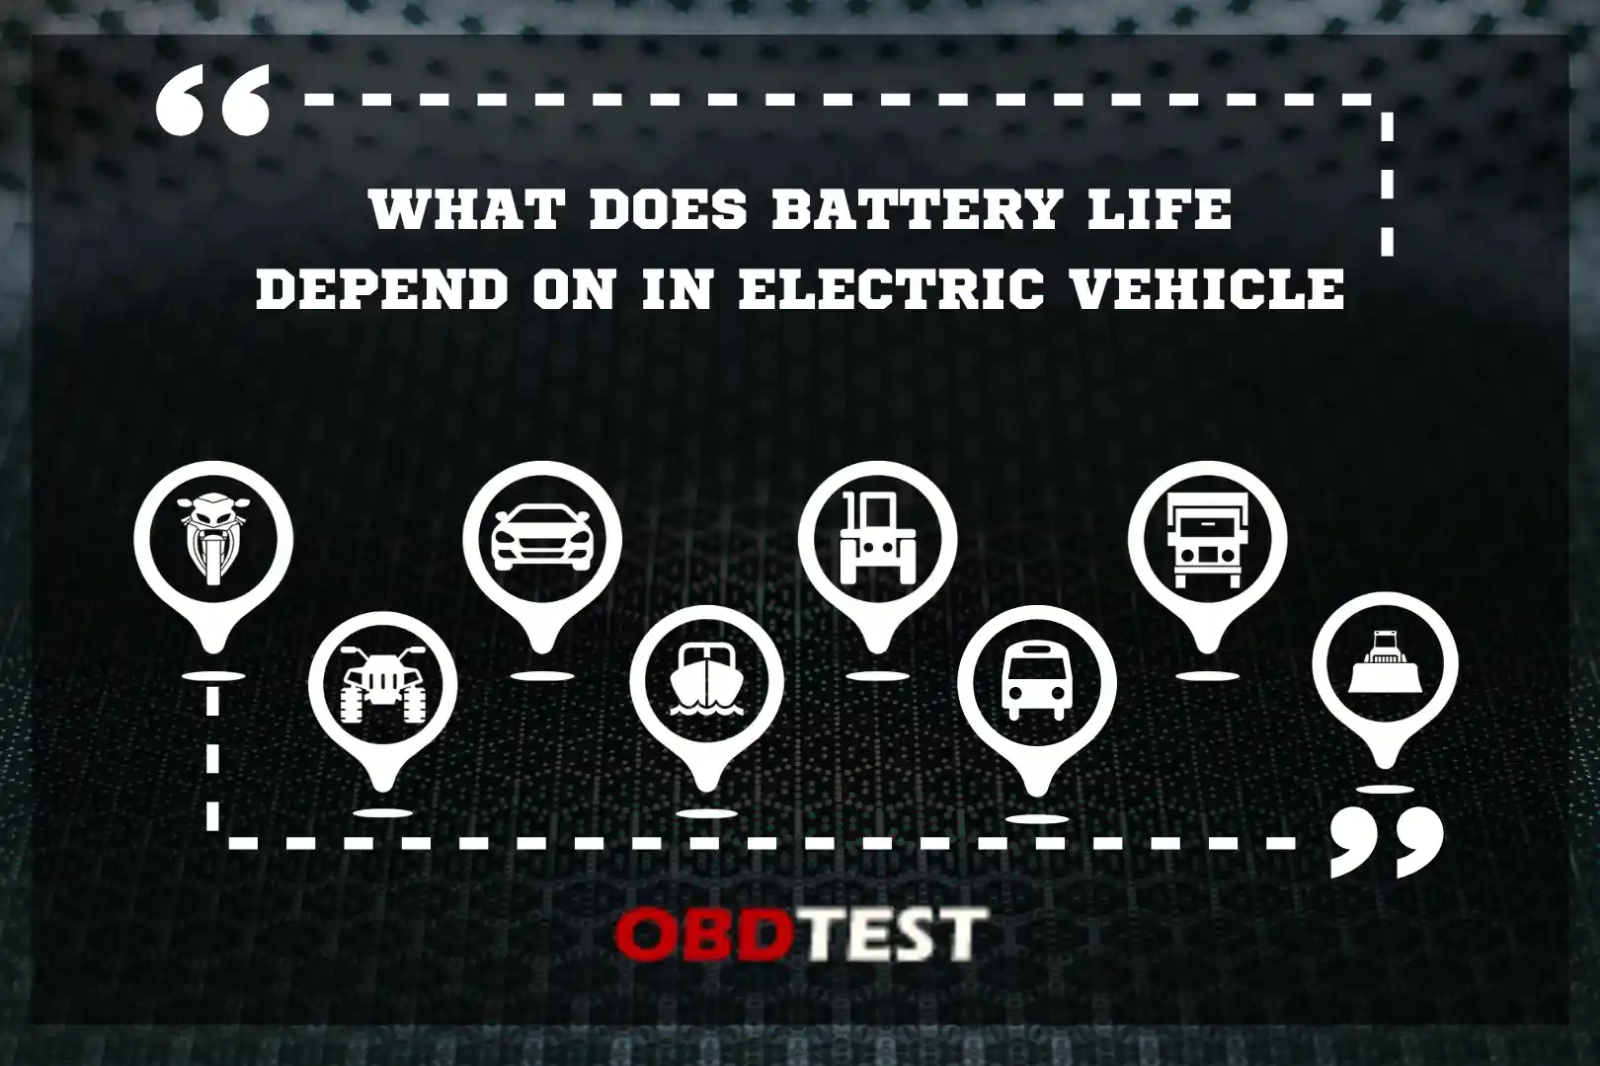 Factors affecting battery life in electric vehicles